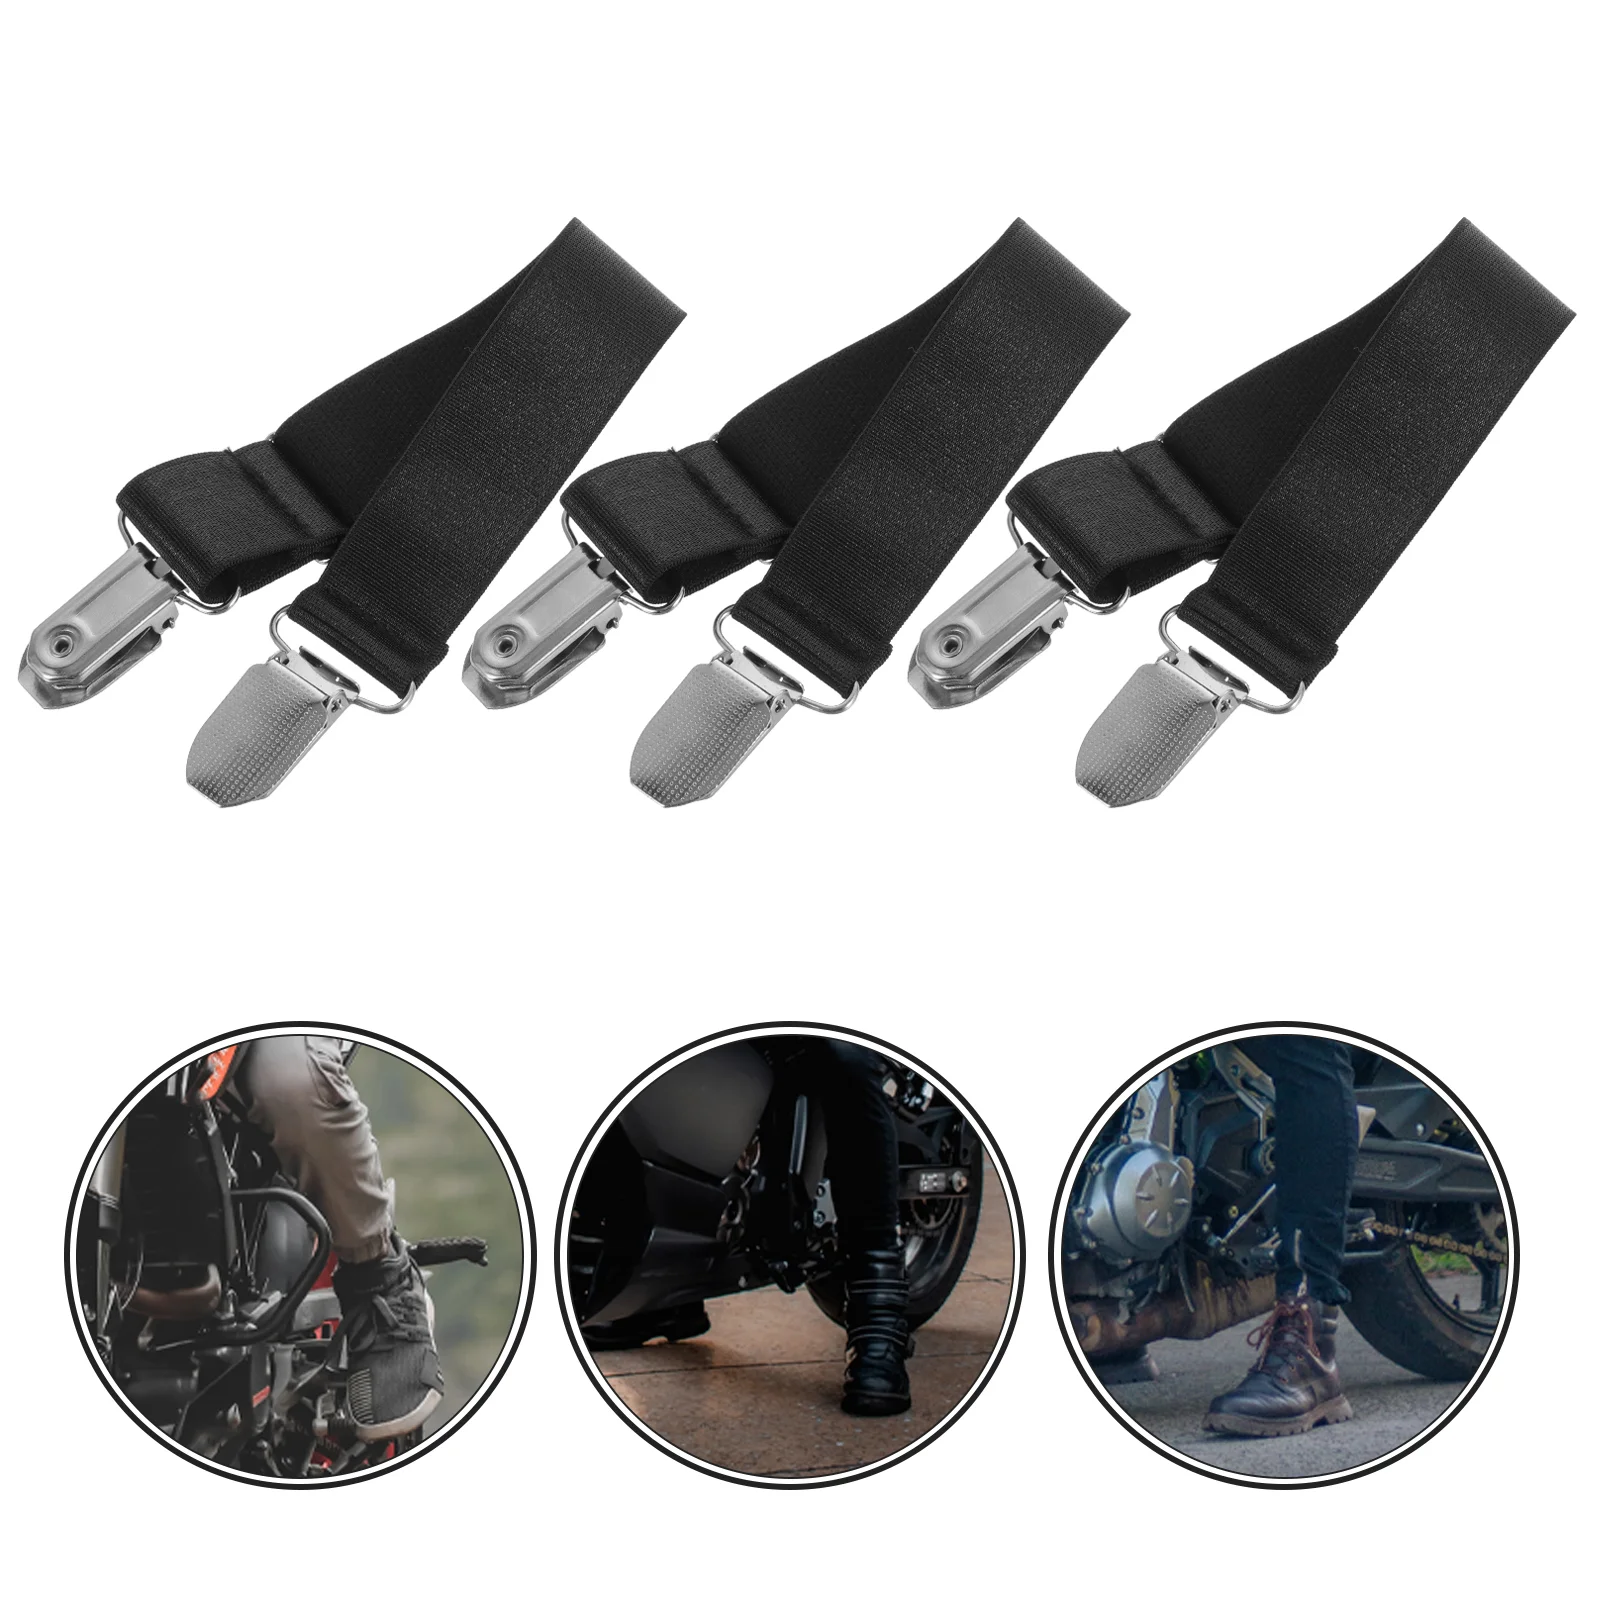 

6 Pcs Boot Clip Motorcycle Riding Pant Leg Scooters Tie Loop Bikes Delicate Boots Clips Top Women Trendy Metal Strap Miss